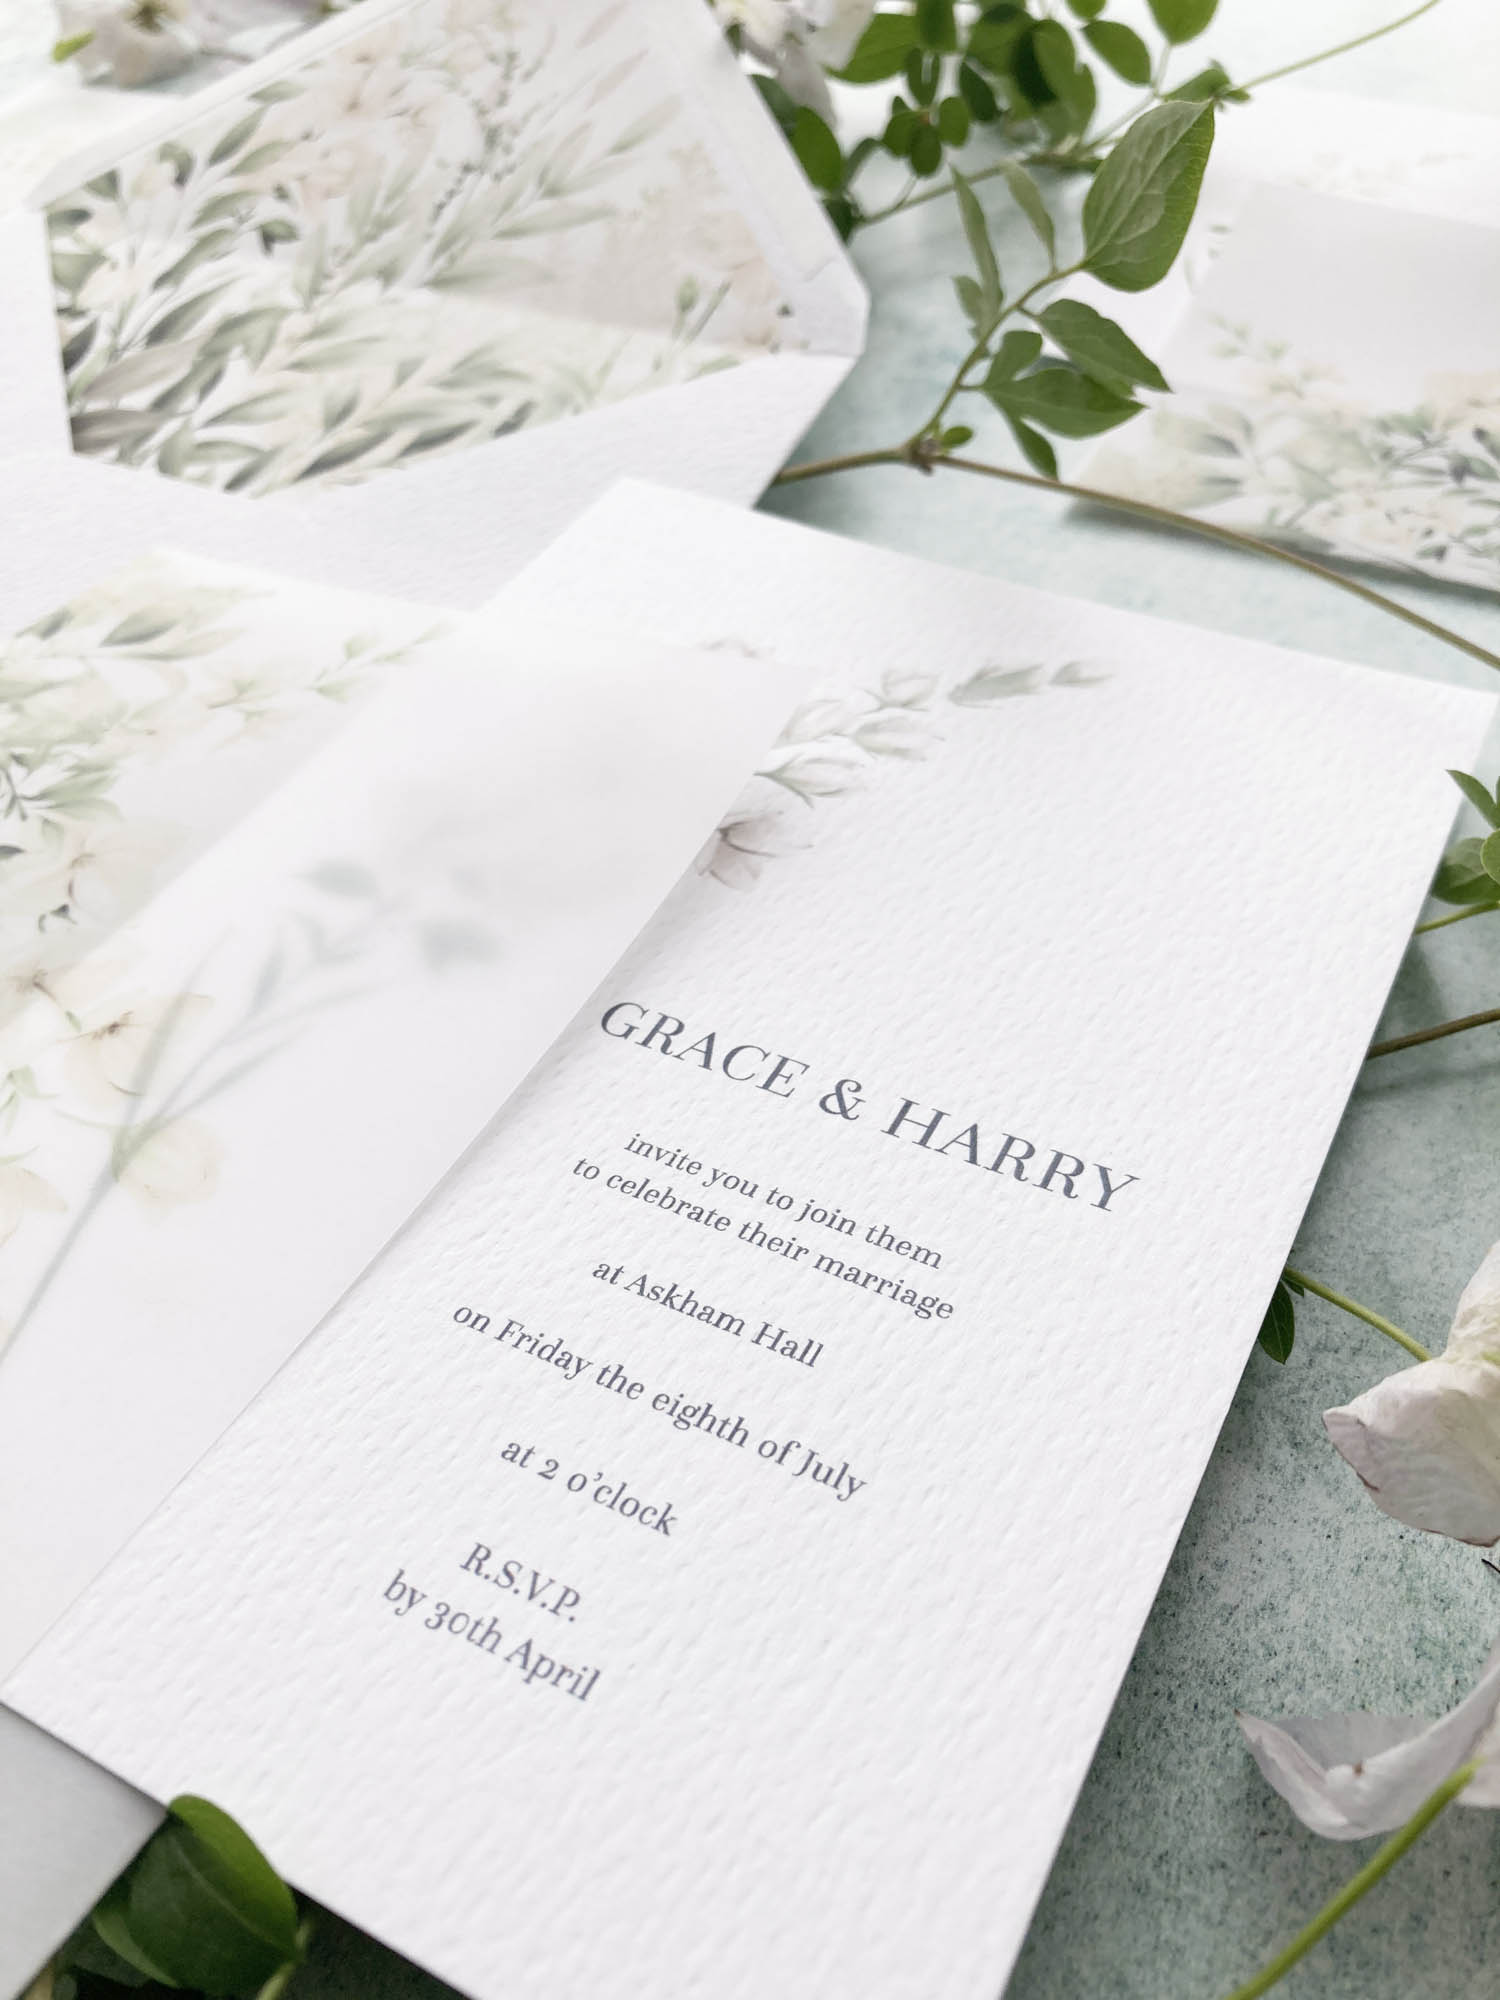 Botanical wedding stationery suite from By Moon & Tide